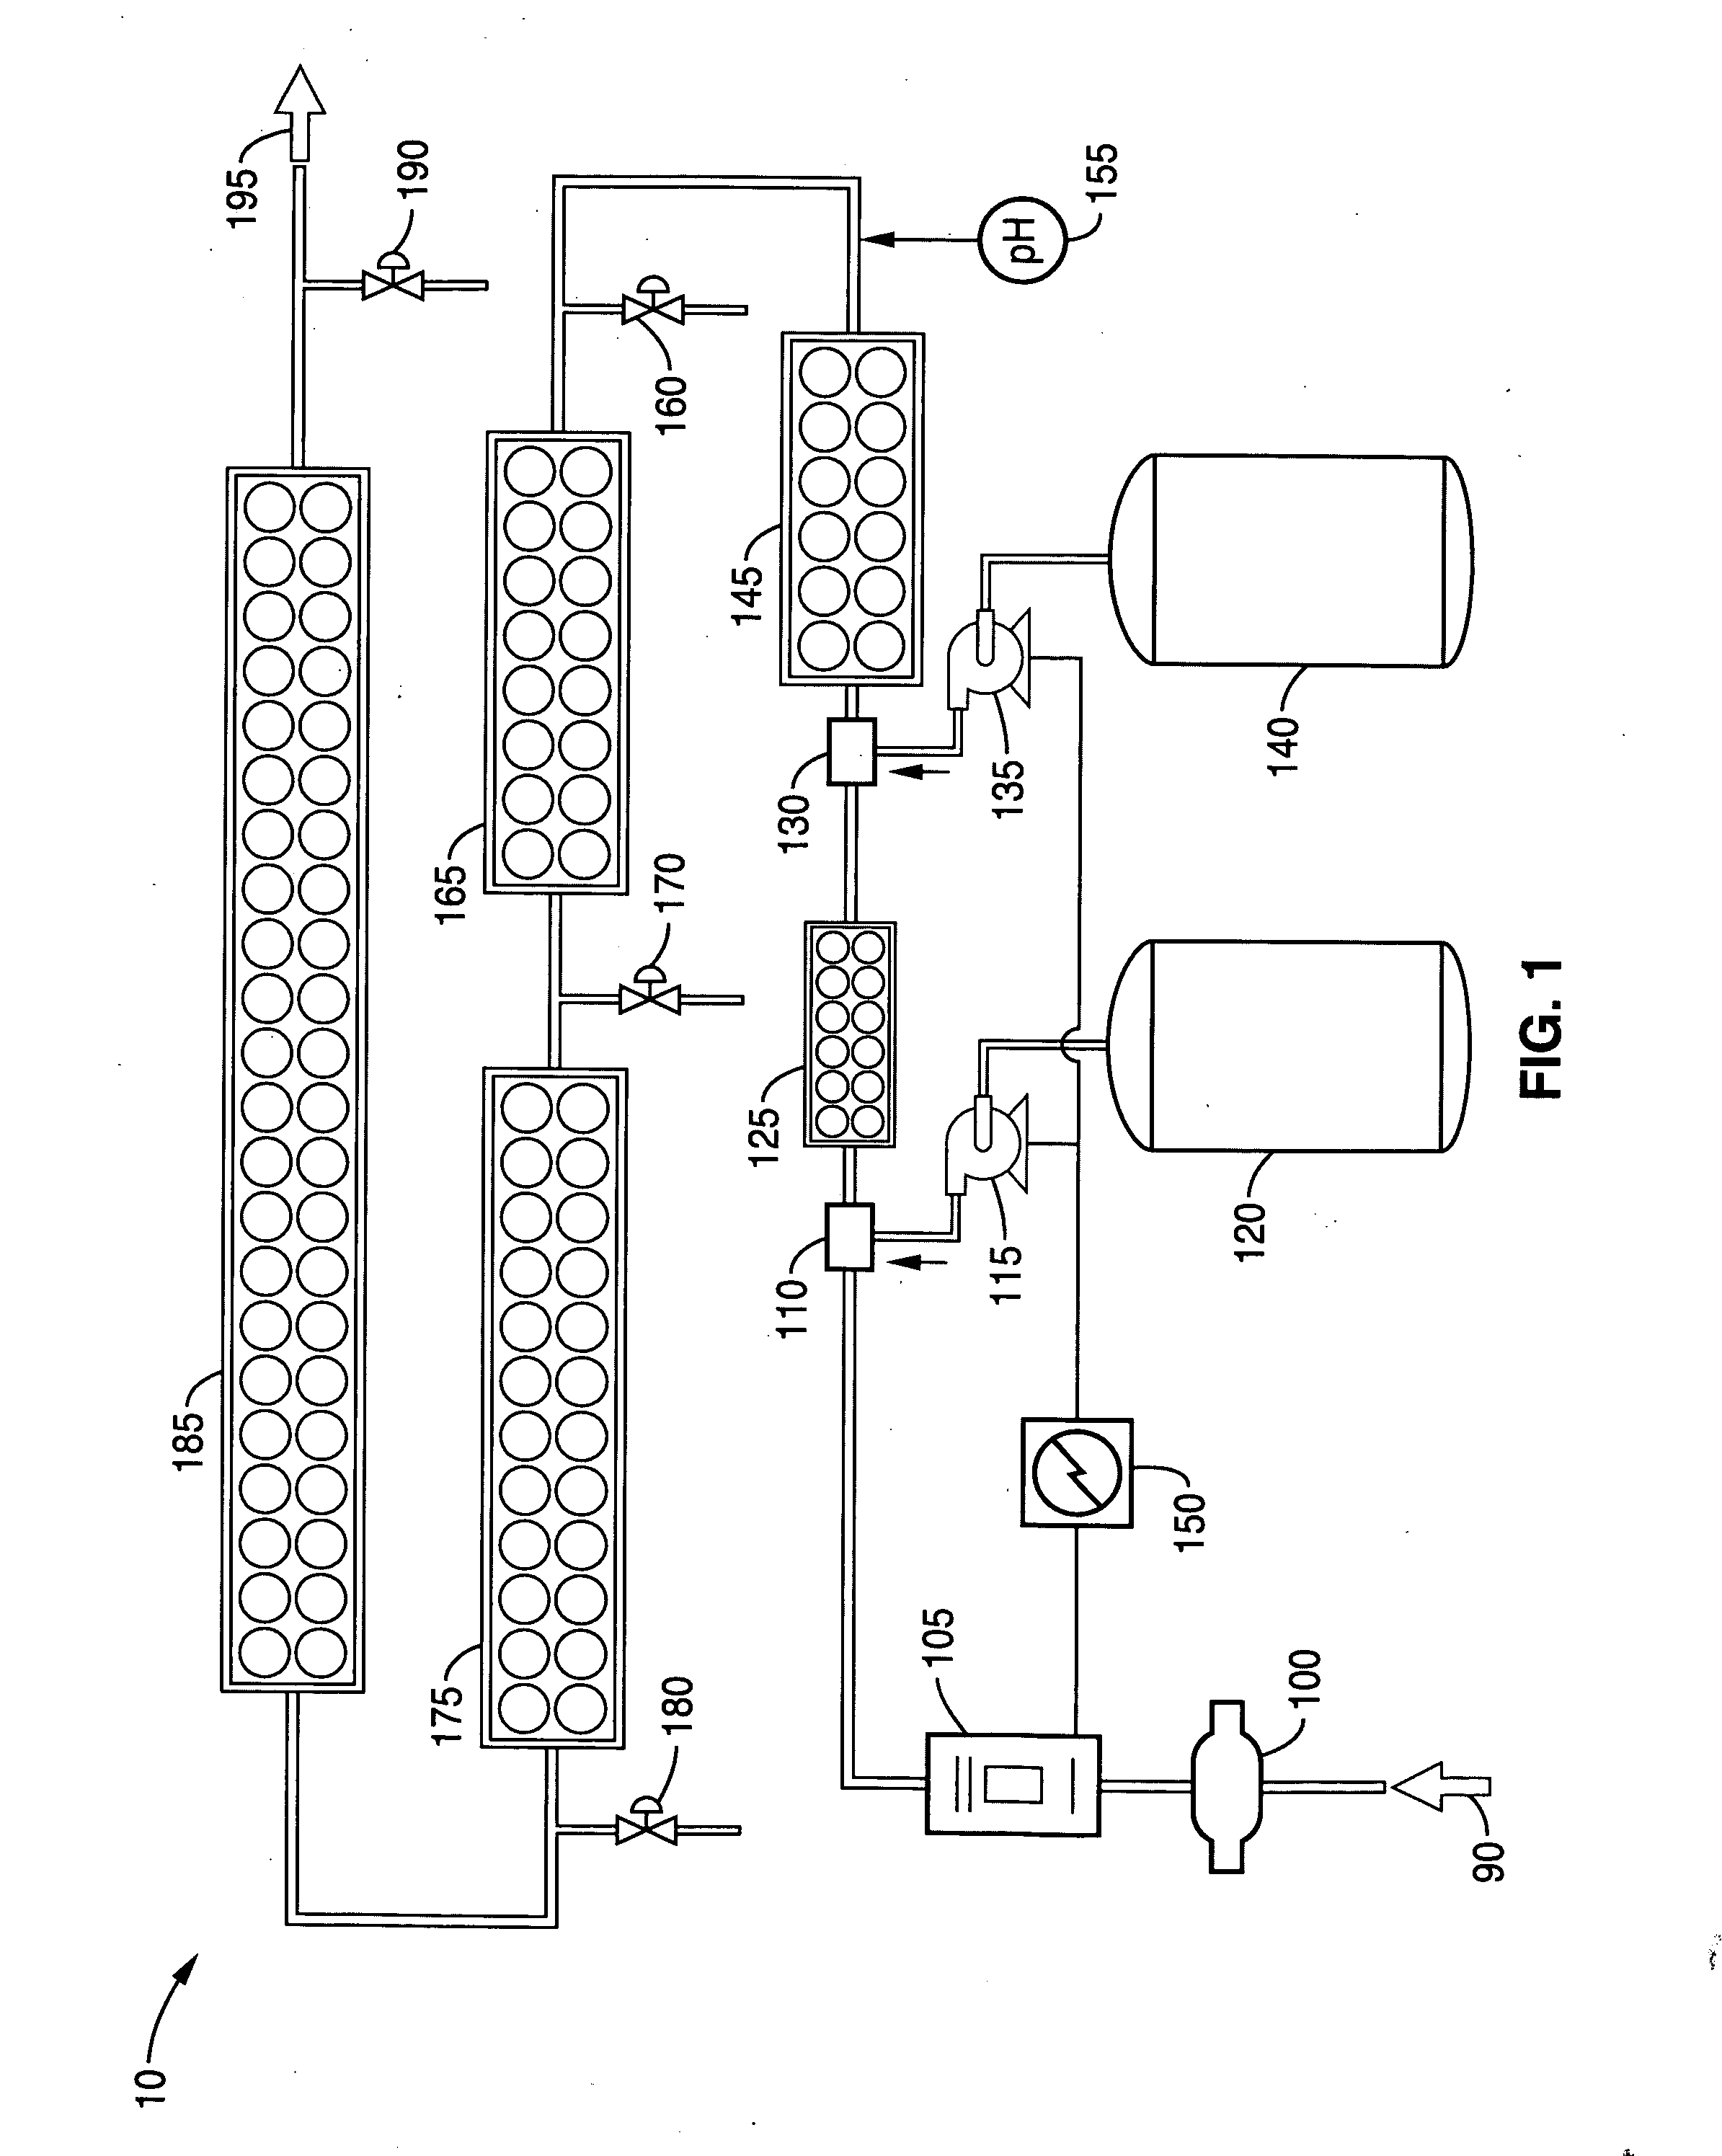 Methods and compositions for the generation of peracetic acid on site at the point-of-use